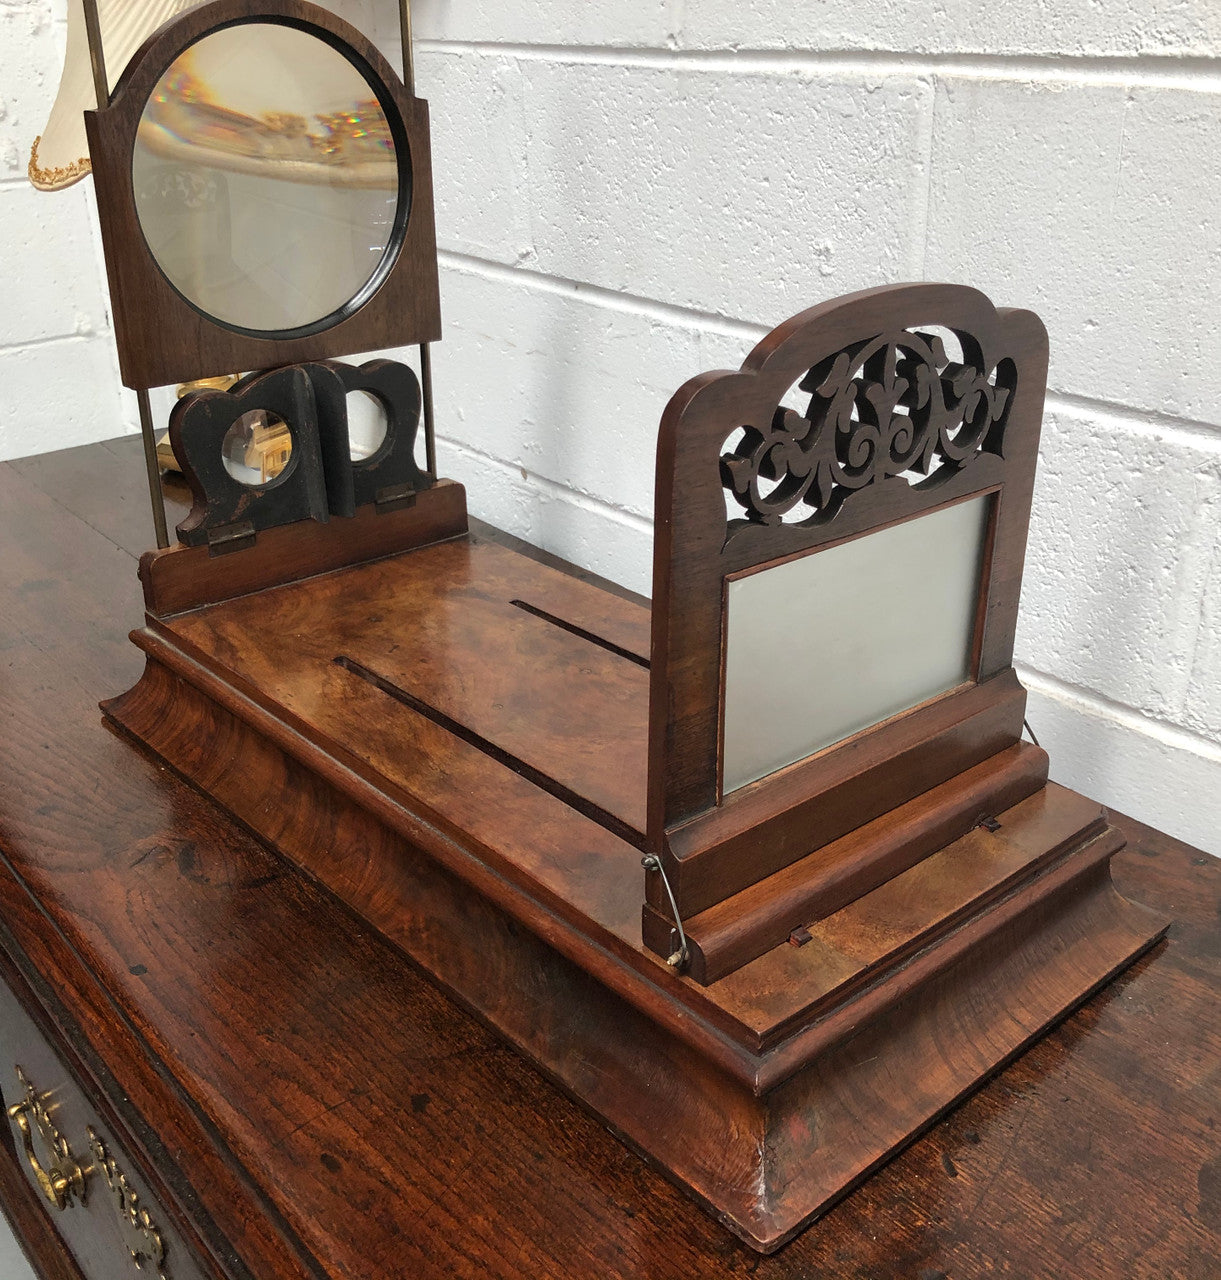 Victorian beautiful Walnut stereoscope viewer with 12 amazing photo view cards of all different locations. In good original detailed condition.